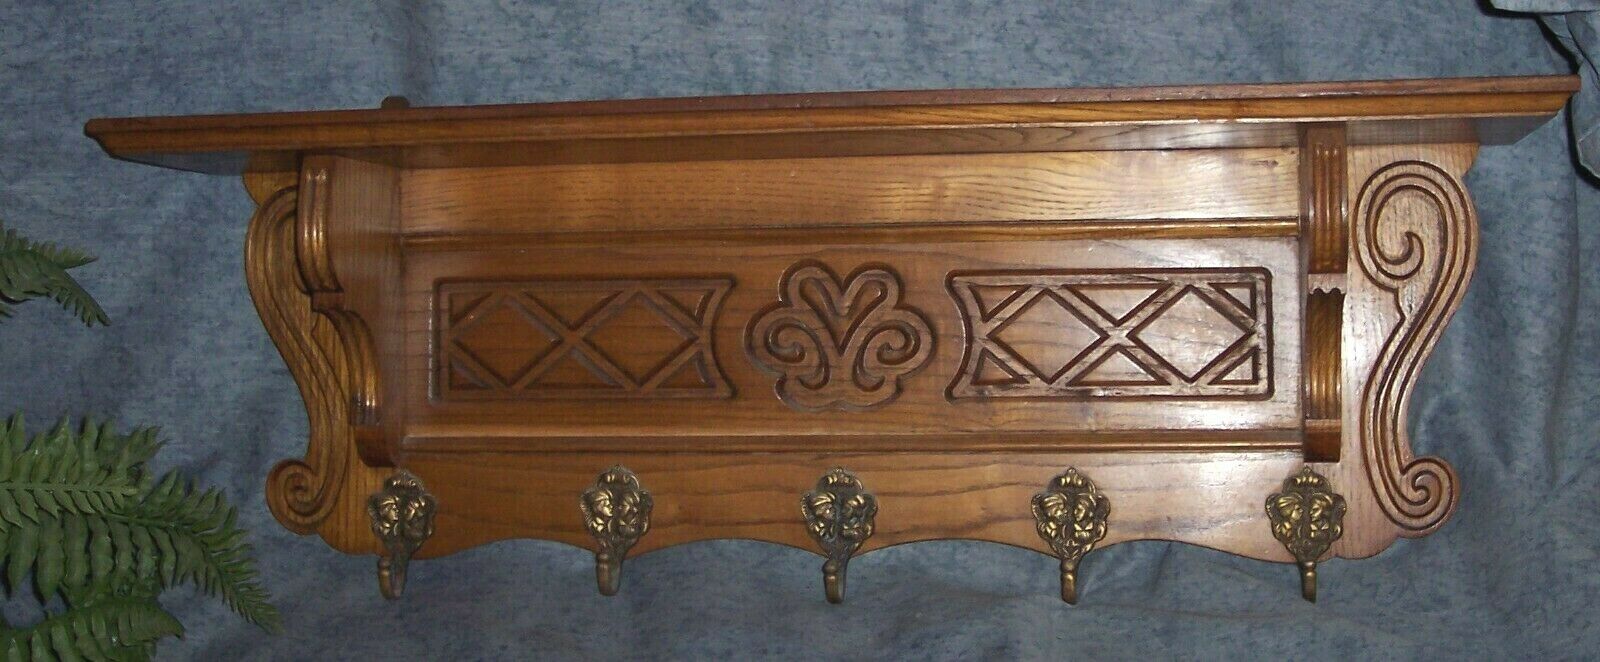 Antique French Carved Kitchen Wall Shelf Copper Coats Pots Hats Clock Farm House